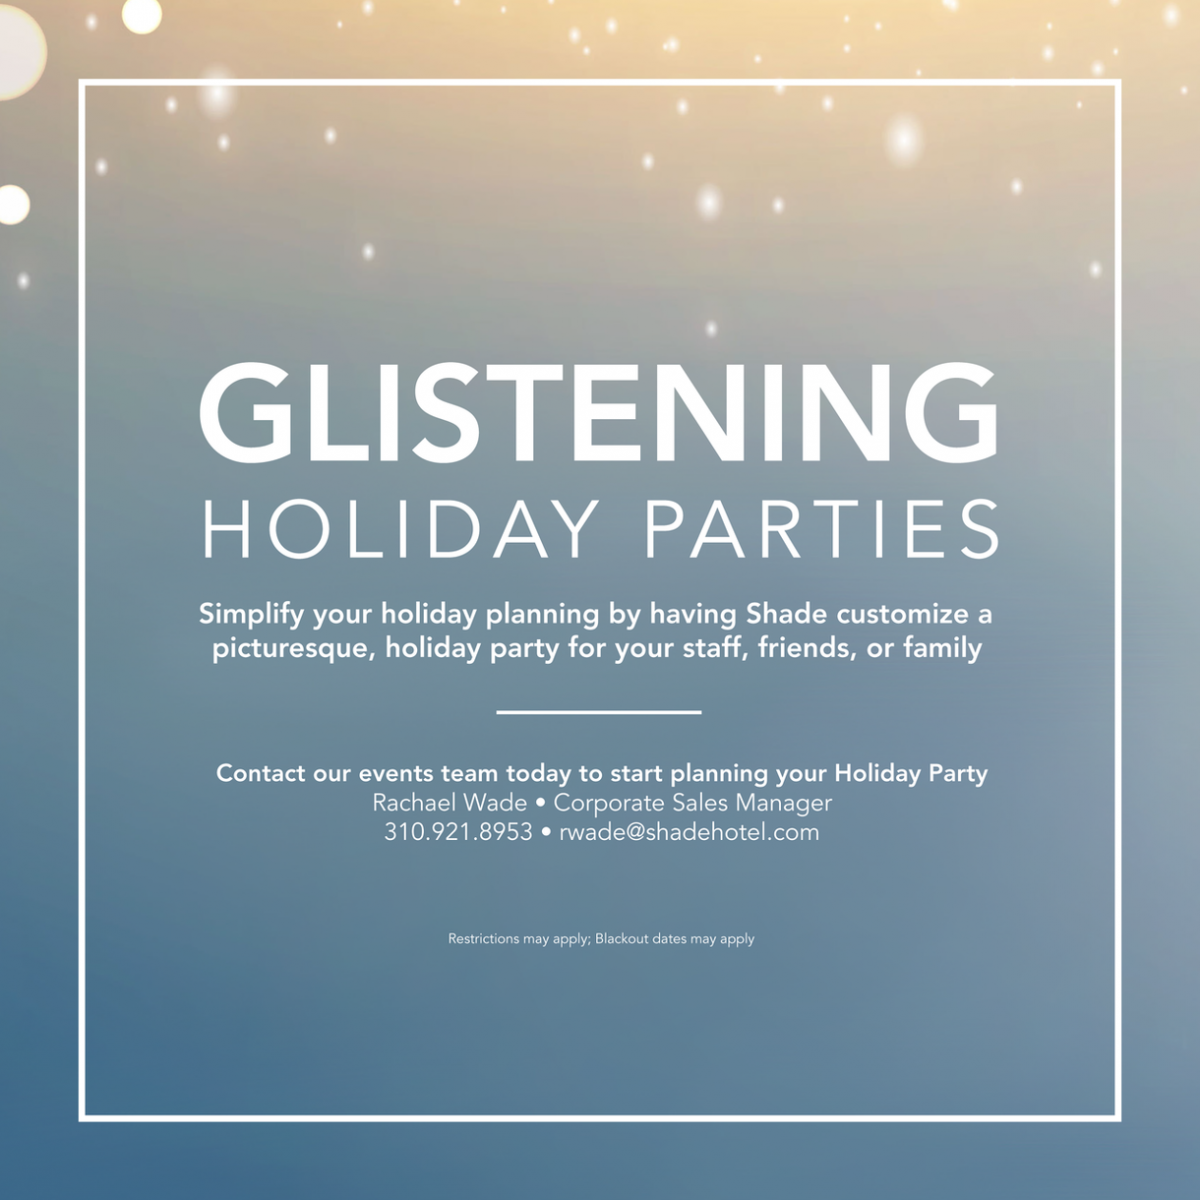 Glistening Holiday Parties Poster